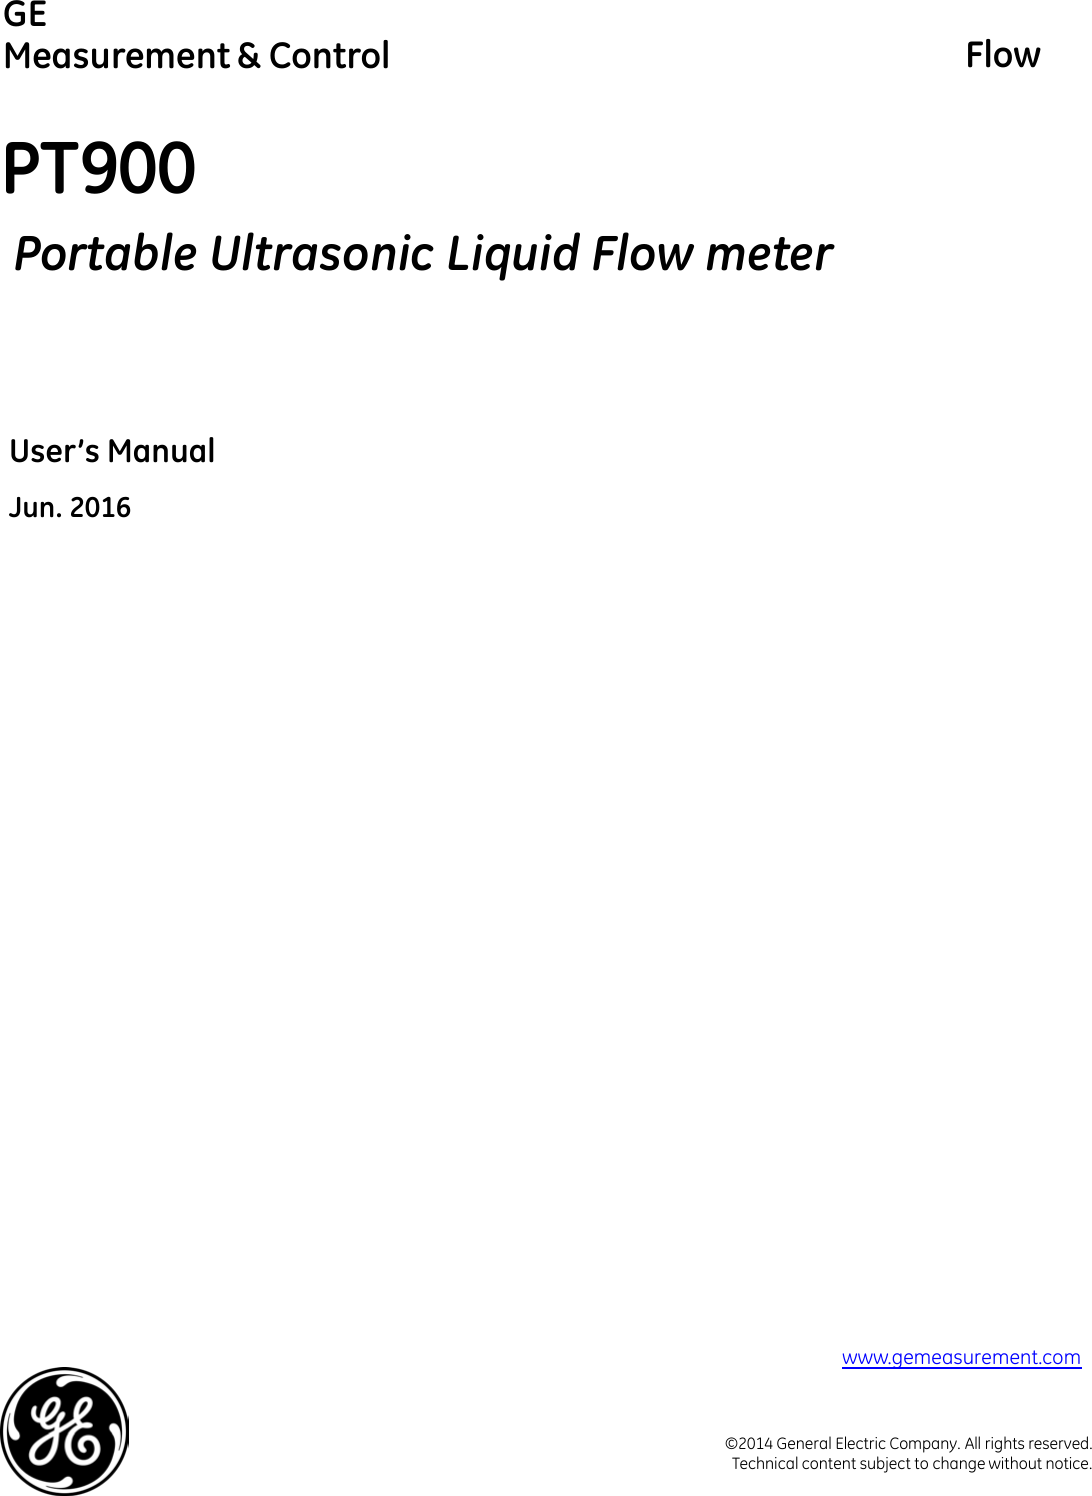  GE Measurement &amp; Control                                                                  Flow © 2014 General Electric Company. All rights reserved. Technical content subject to change without notice.    PT900  Portable Ultrasonic Liquid Flow meter       User’s Manual Jun. 2016                                 www.gemeasurement.com 